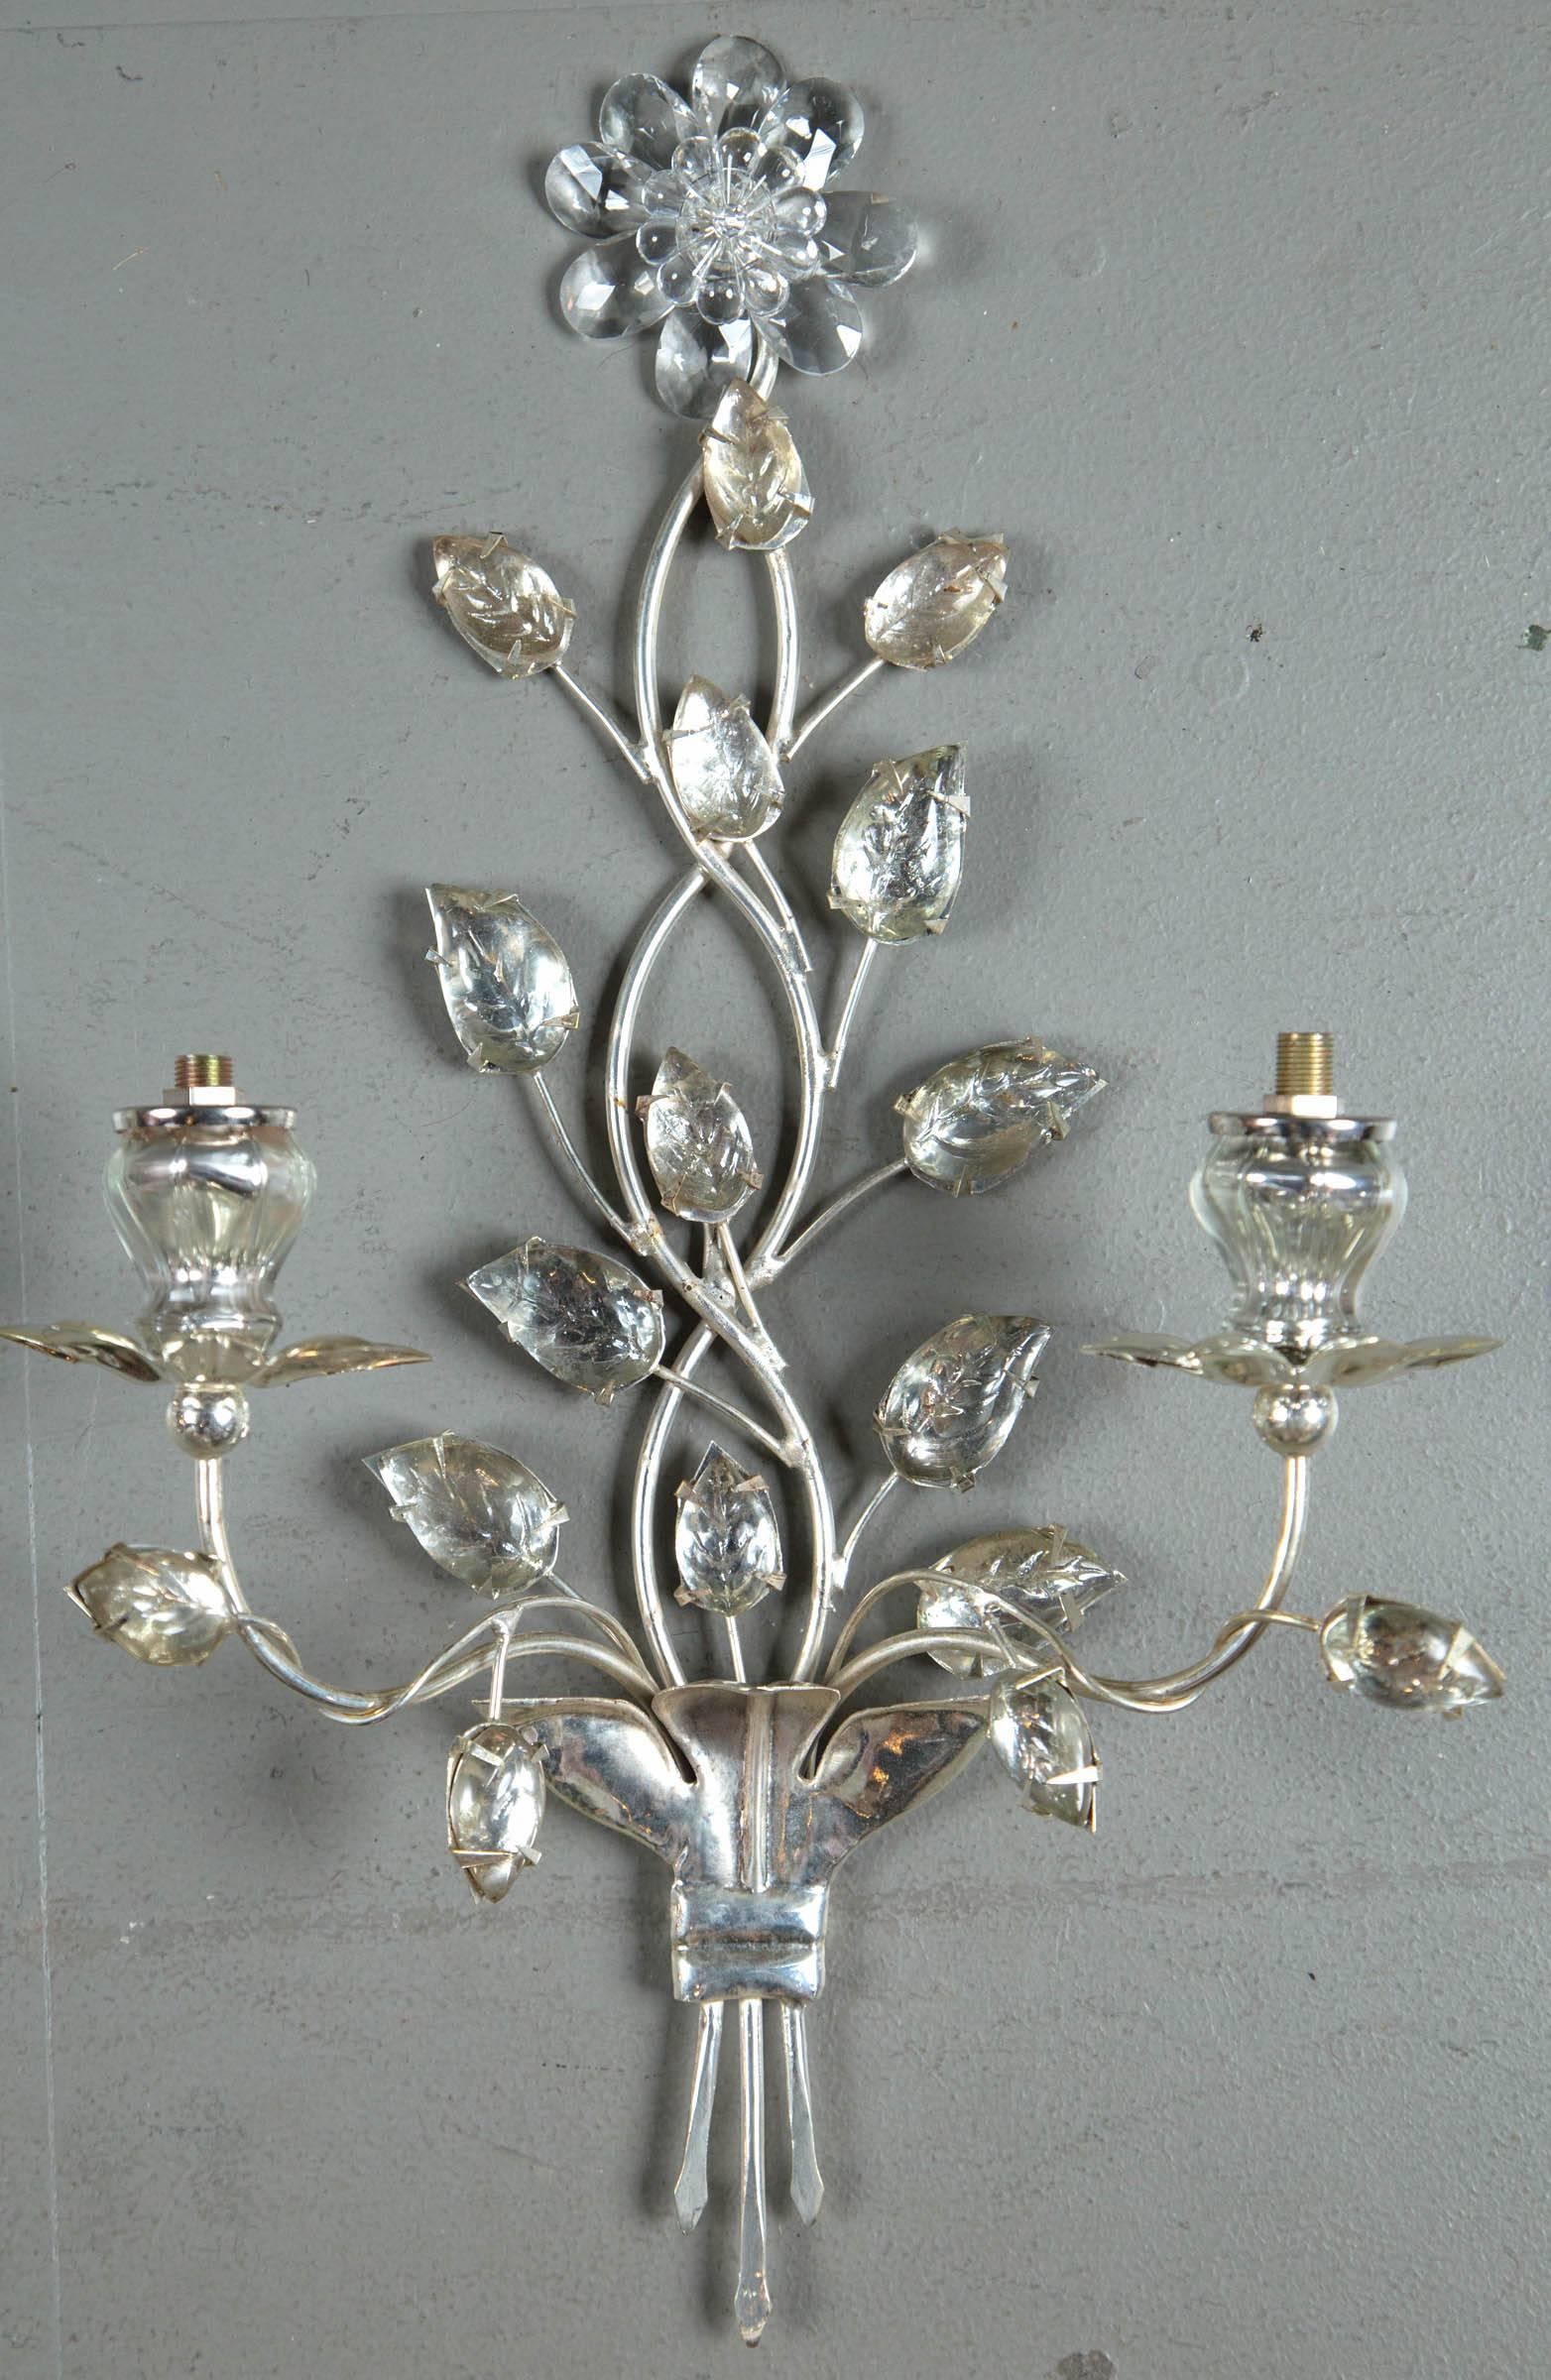 A set of 12 circa 1930 French silver plated sconces with double lights. $4,400 list pair; six pairs available.